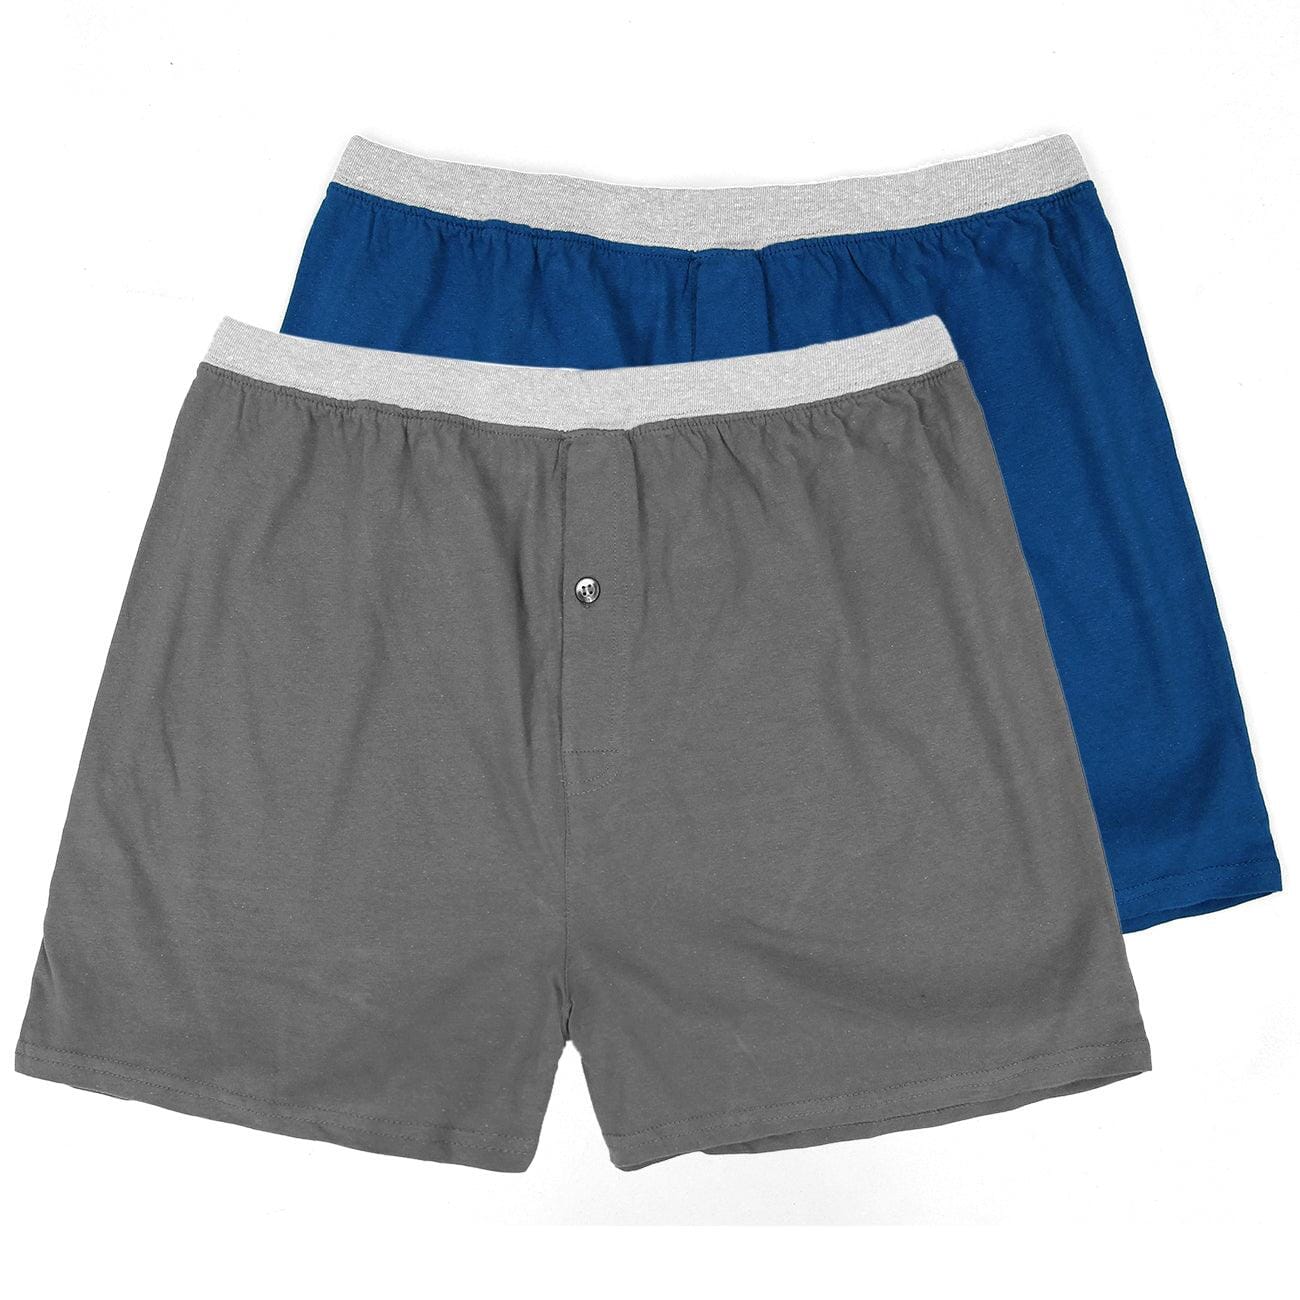 One Button Fly Pack Of 2 Boxer Shorts For Men (11697)